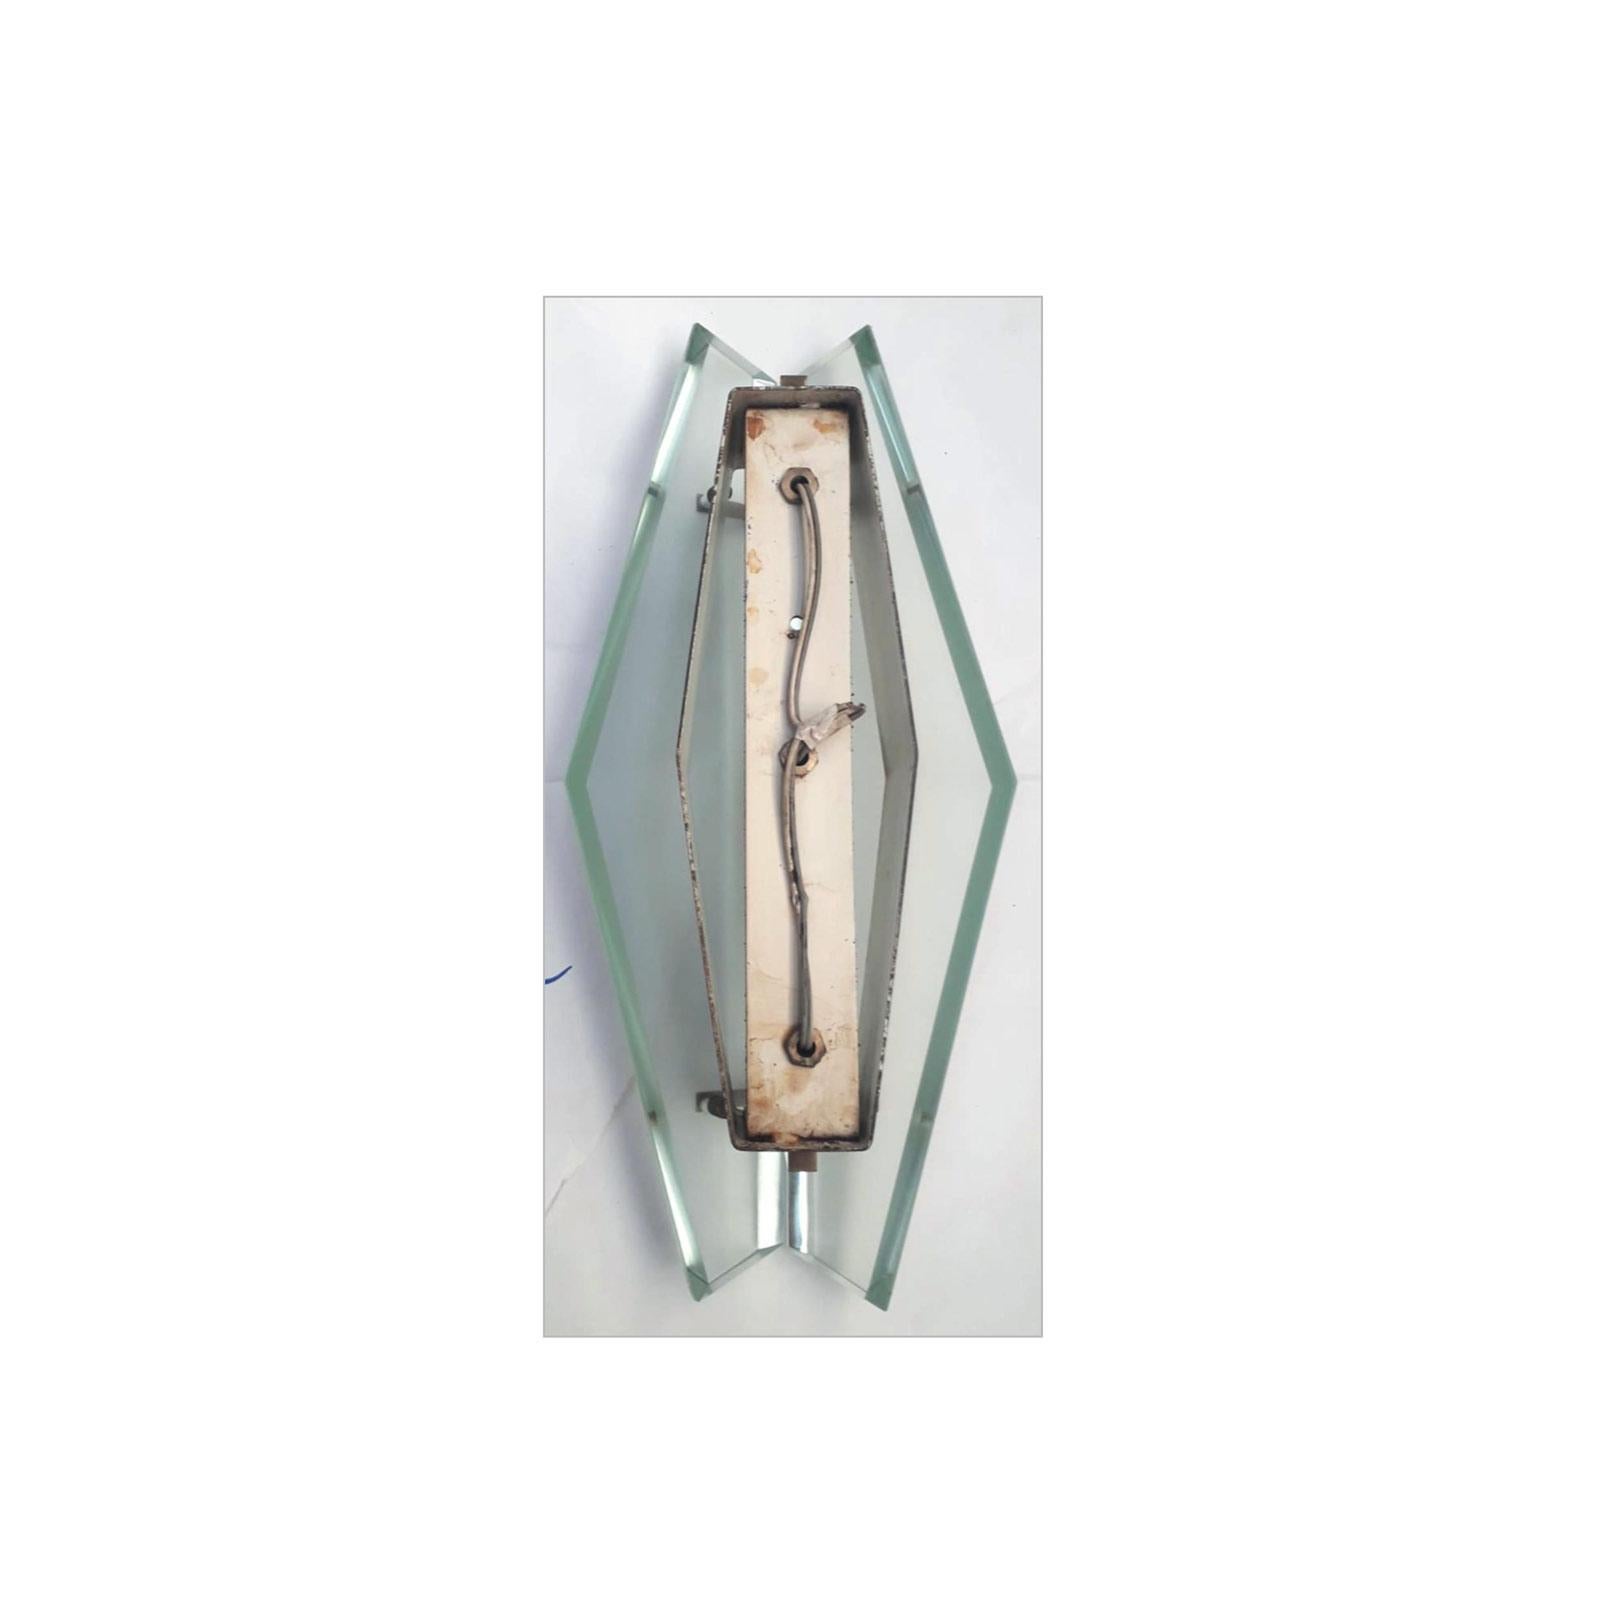 Pair of Vintage Italian beveled glass and sconces designed by Max Ingrand and manufactured by Fontana Arte, model 1943, circa 1960s, made in Milan, Italy.